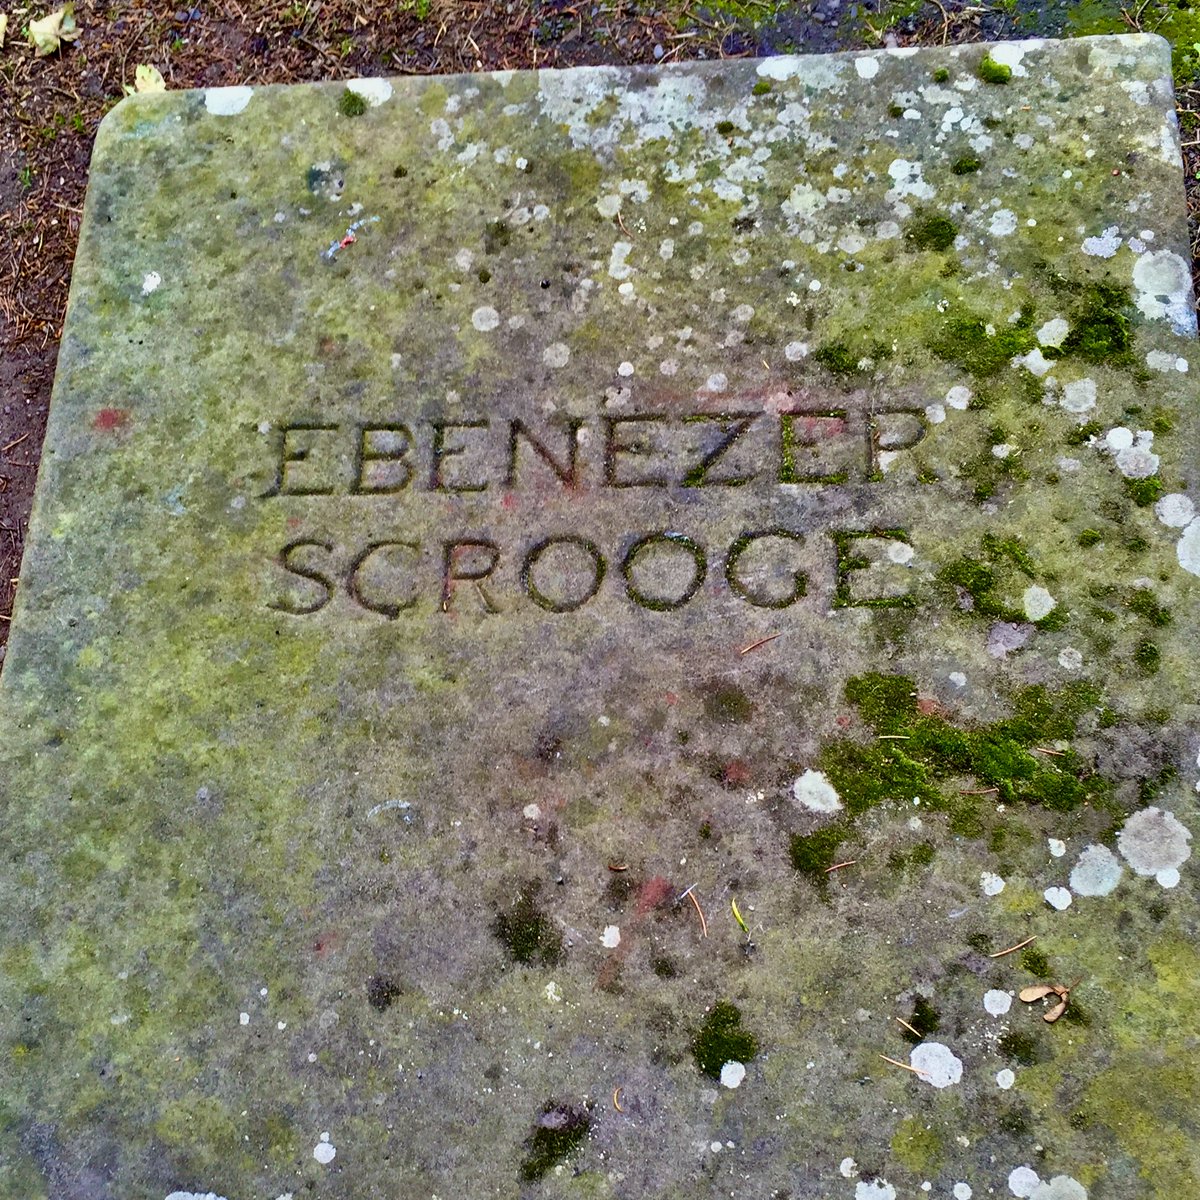 As Queen Camilla visits Shrewsbury, it is a chance to mention my favourite local novelty... the famous grave of Ebenezer Scrooge! Located at the amazing St Chad's Church in the town.